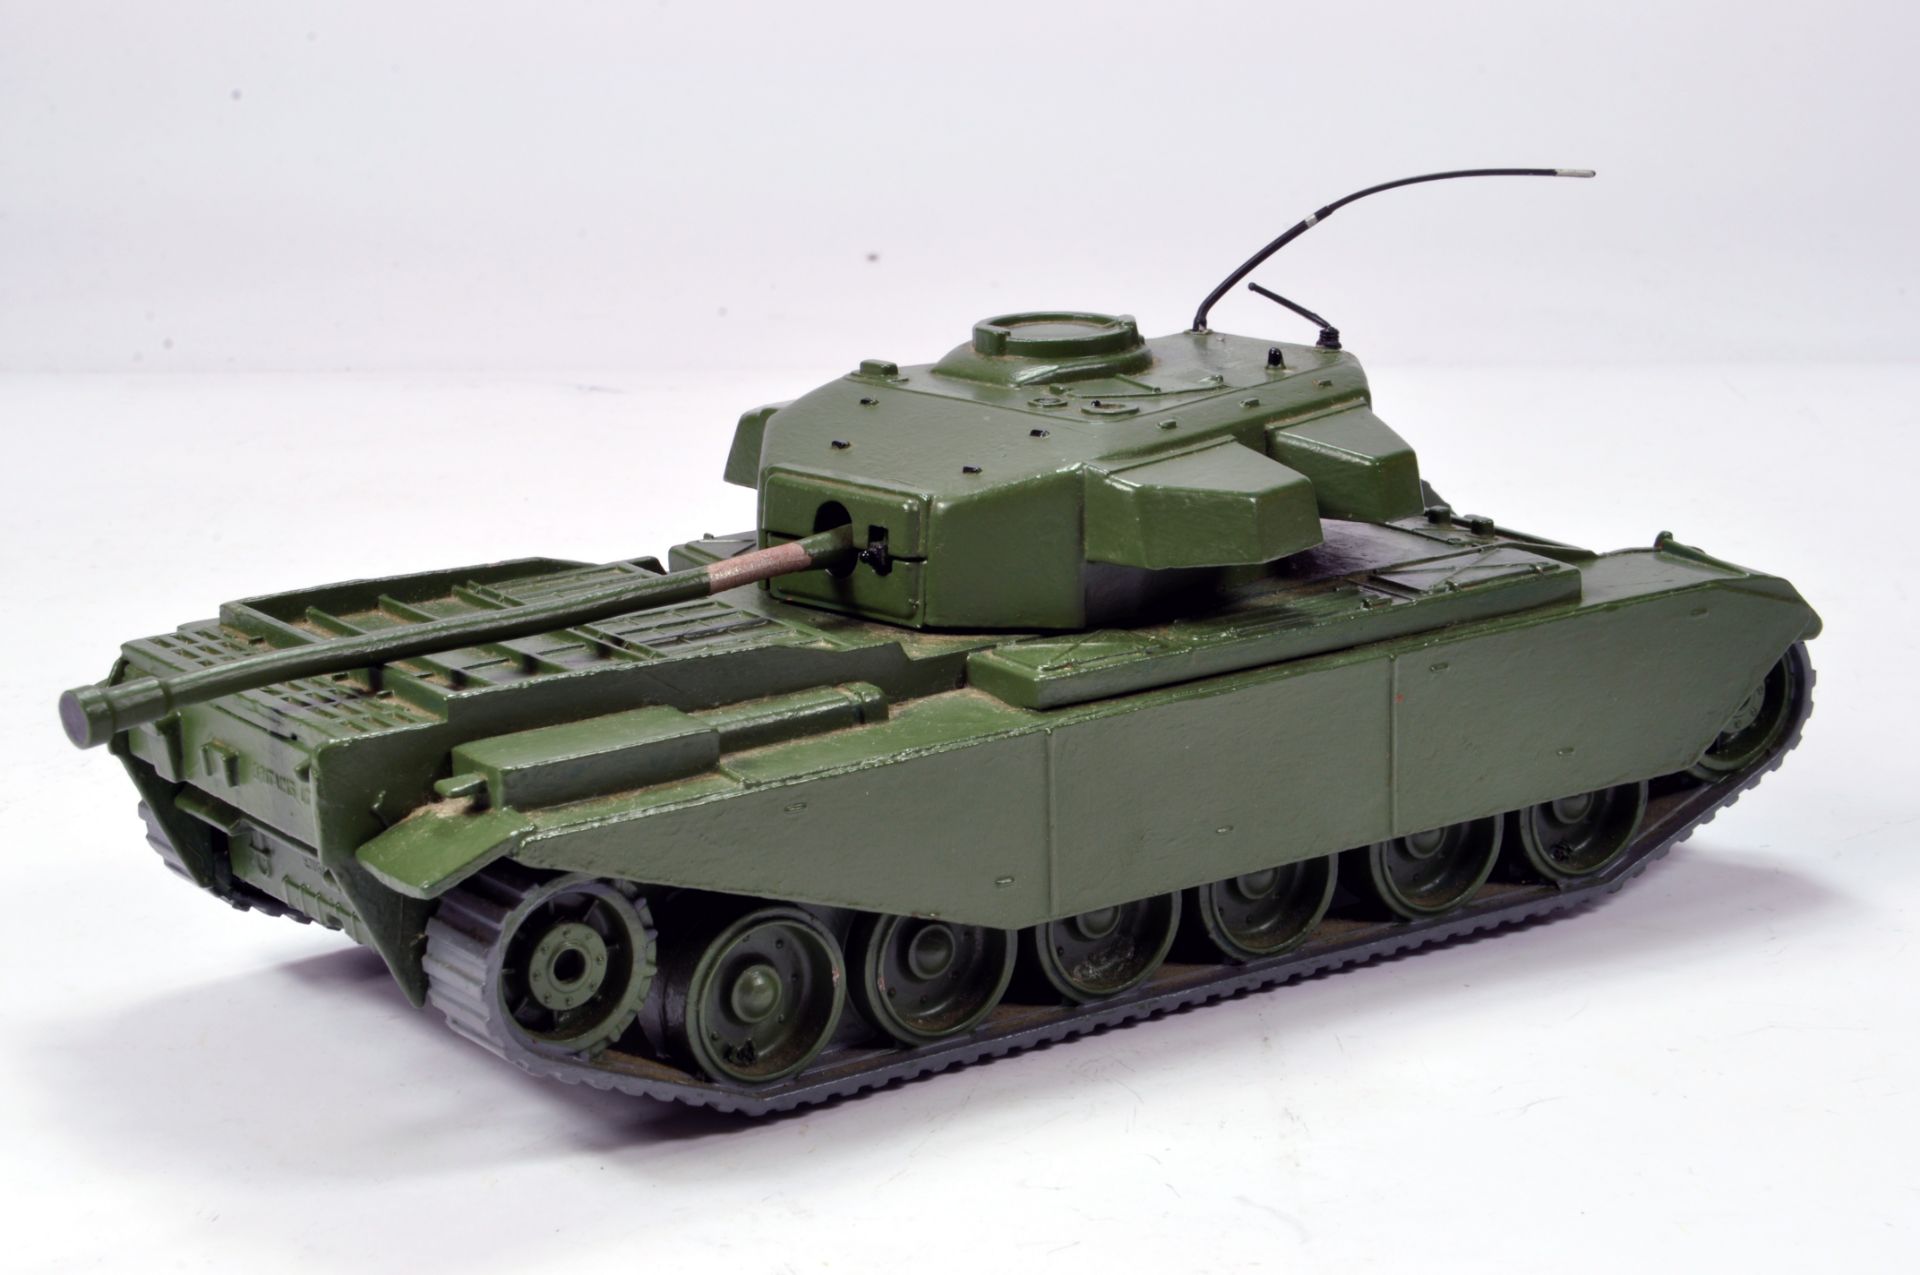 Britains No. 2150 Centurion Tank. An impressive model that although lacks decal, displays well and